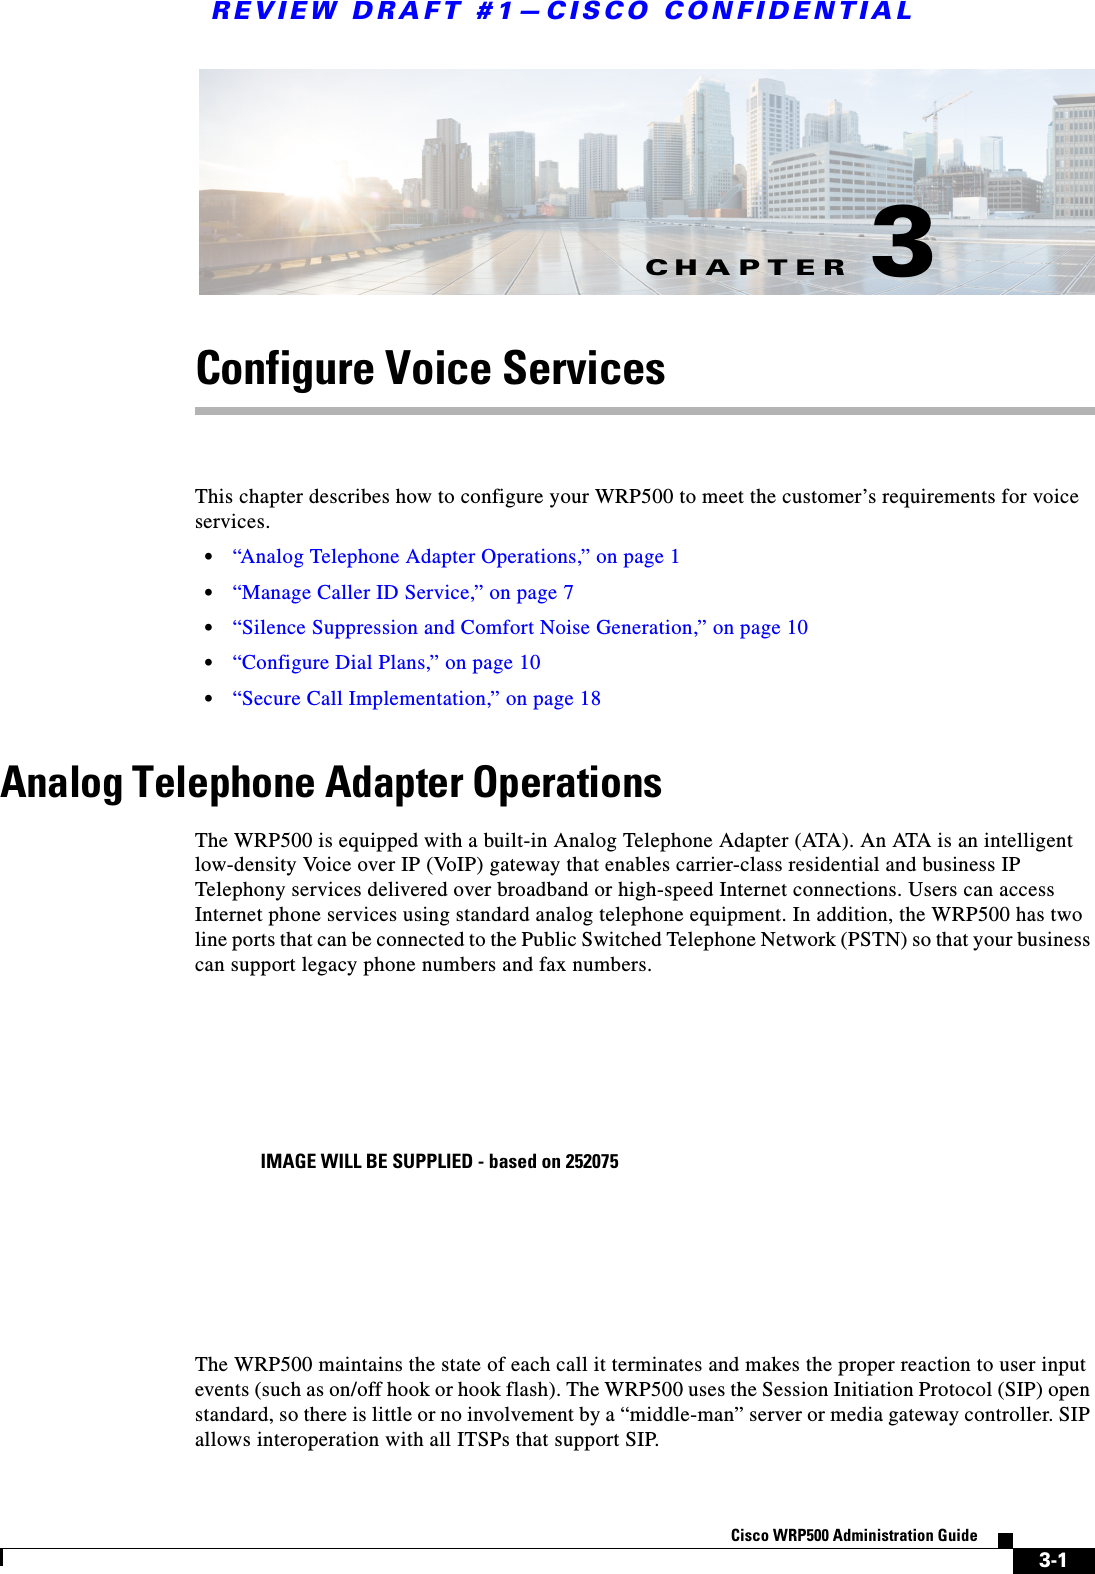 CHAPTERREVIEW DRAFT #1—CISCO CONFIDENTIAL3-1Cisco WRP500 Administration Guide 3Configure Voice ServicesThis chapter describes how to configure your WRP500 to meet the customer’s requirements for voice services.•“Analog Telephone Adapter Operations,” on page 1•“Manage Caller ID Service,” on page 7•“Silence Suppression and Comfort Noise Generation,” on page 10•“Configure Dial Plans,” on page 10•“Secure Call Implementation,” on page 18Analog Telephone Adapter OperationsThe WRP500 is equipped with a built-in Analog Telephone Adapter (ATA). An ATA is an intelligent low-density Voice over IP (VoIP) gateway that enables carrier-class residential and business IP Telephony services delivered over broadband or high-speed Internet connections. Users can access Internet phone services using standard analog telephone equipment. In addition, the WRP500 has two line ports that can be connected to the Public Switched Telephone Network (PSTN) so that your business can support legacy phone numbers and fax numbers. The WRP500 maintains the state of each call it terminates and makes the proper reaction to user input events (such as on/off hook or hook flash). The WRP500 uses the Session Initiation Protocol (SIP) open standard, so there is little or no involvement by a “middle-man” server or media gateway controller. SIP allows interoperation with all ITSPs that support SIP. IMAGE WILL BE SUPPLIED - based on 252075